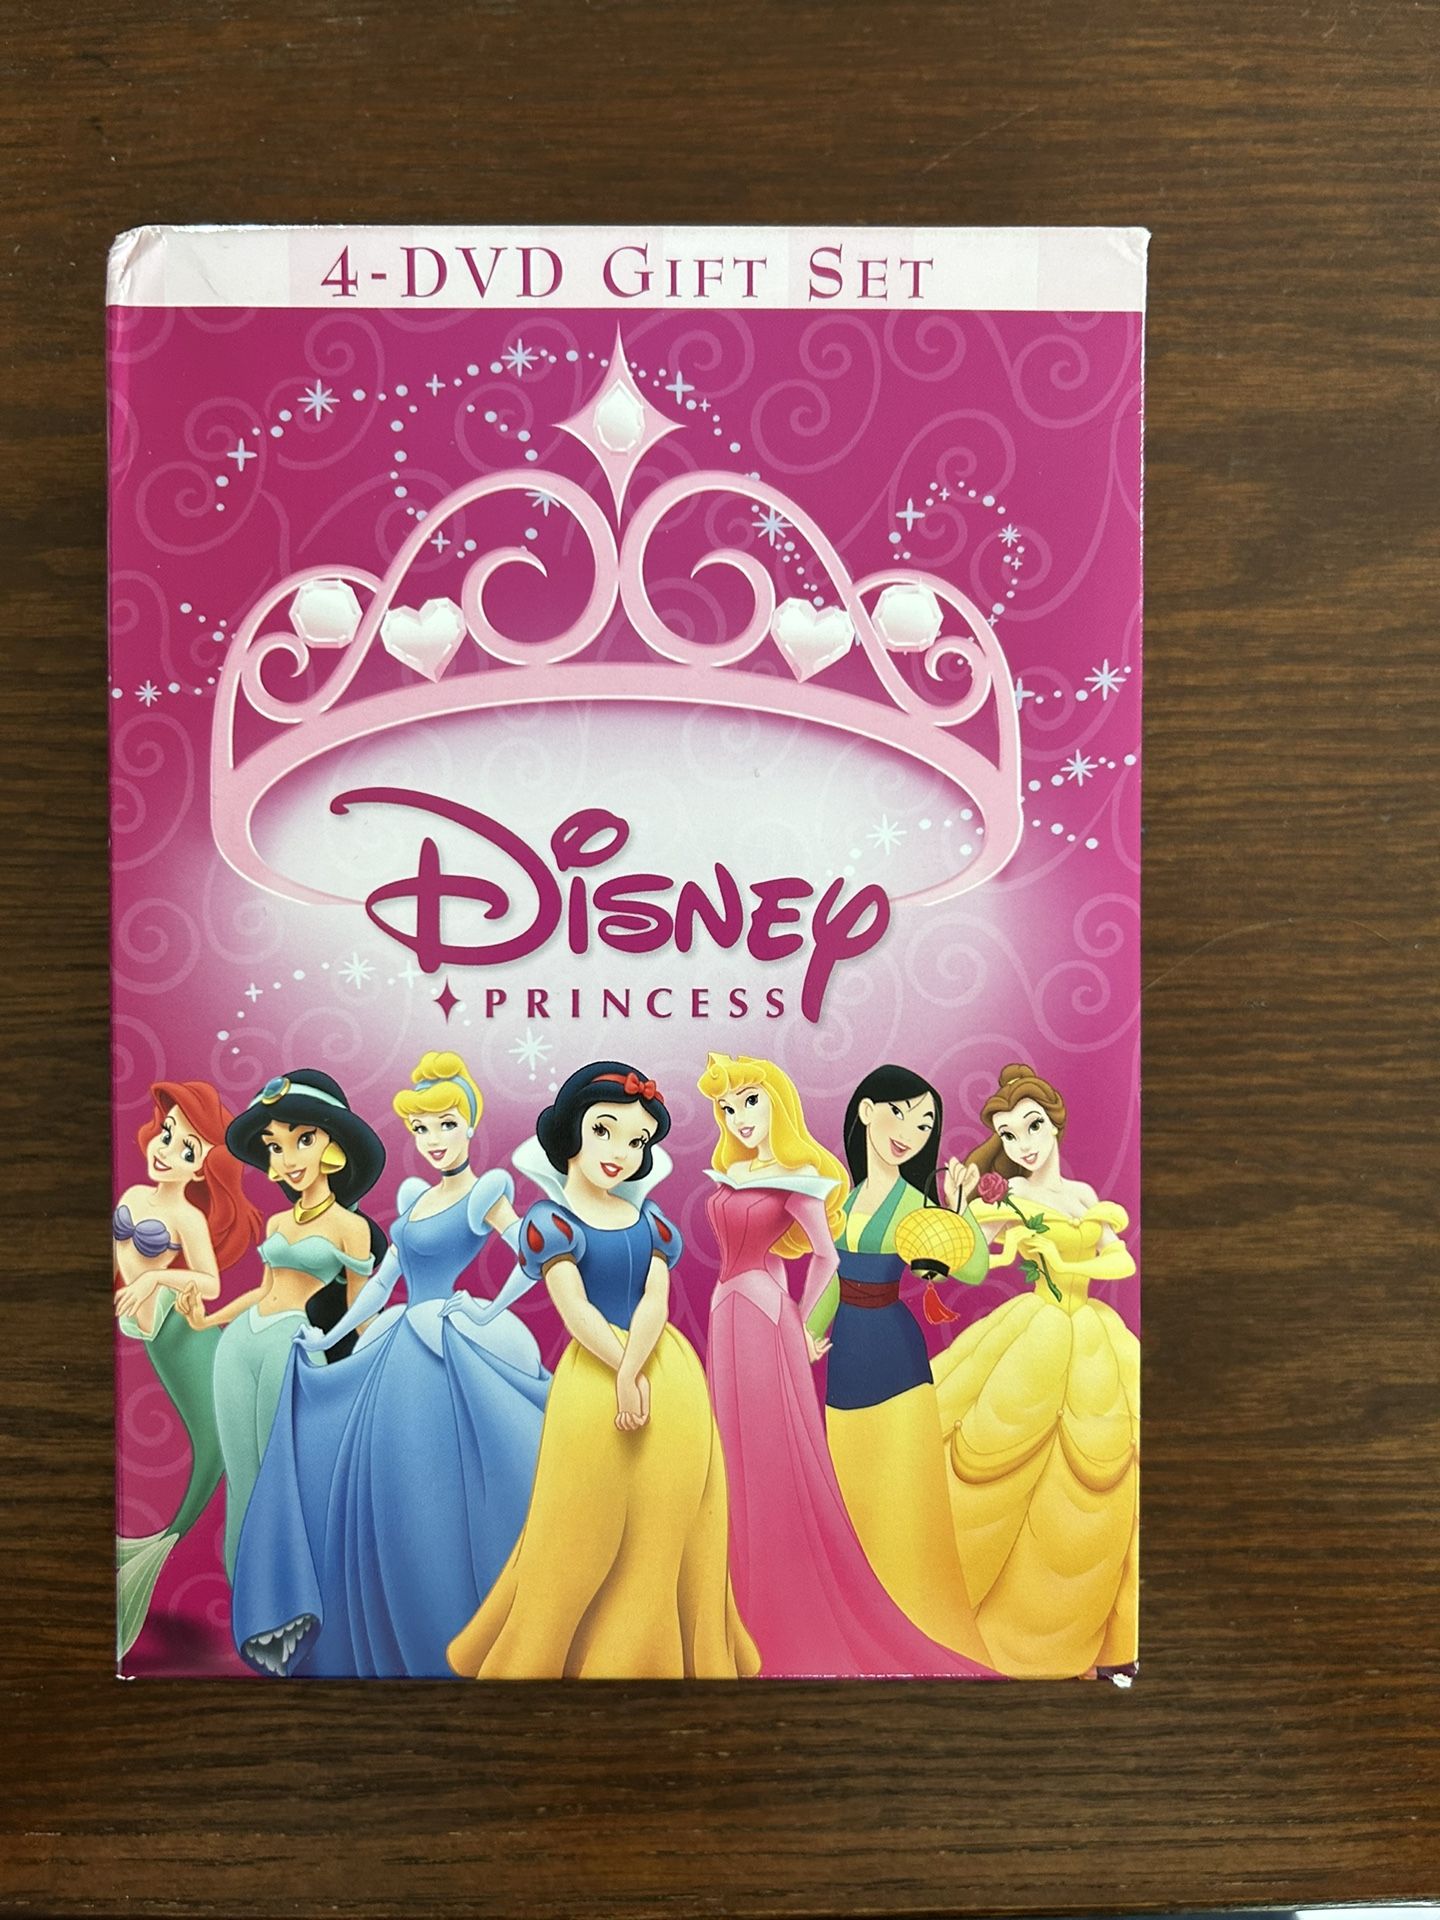 Disney Princess 4-DVD Gift Set: Only Includes 3 DVD’s